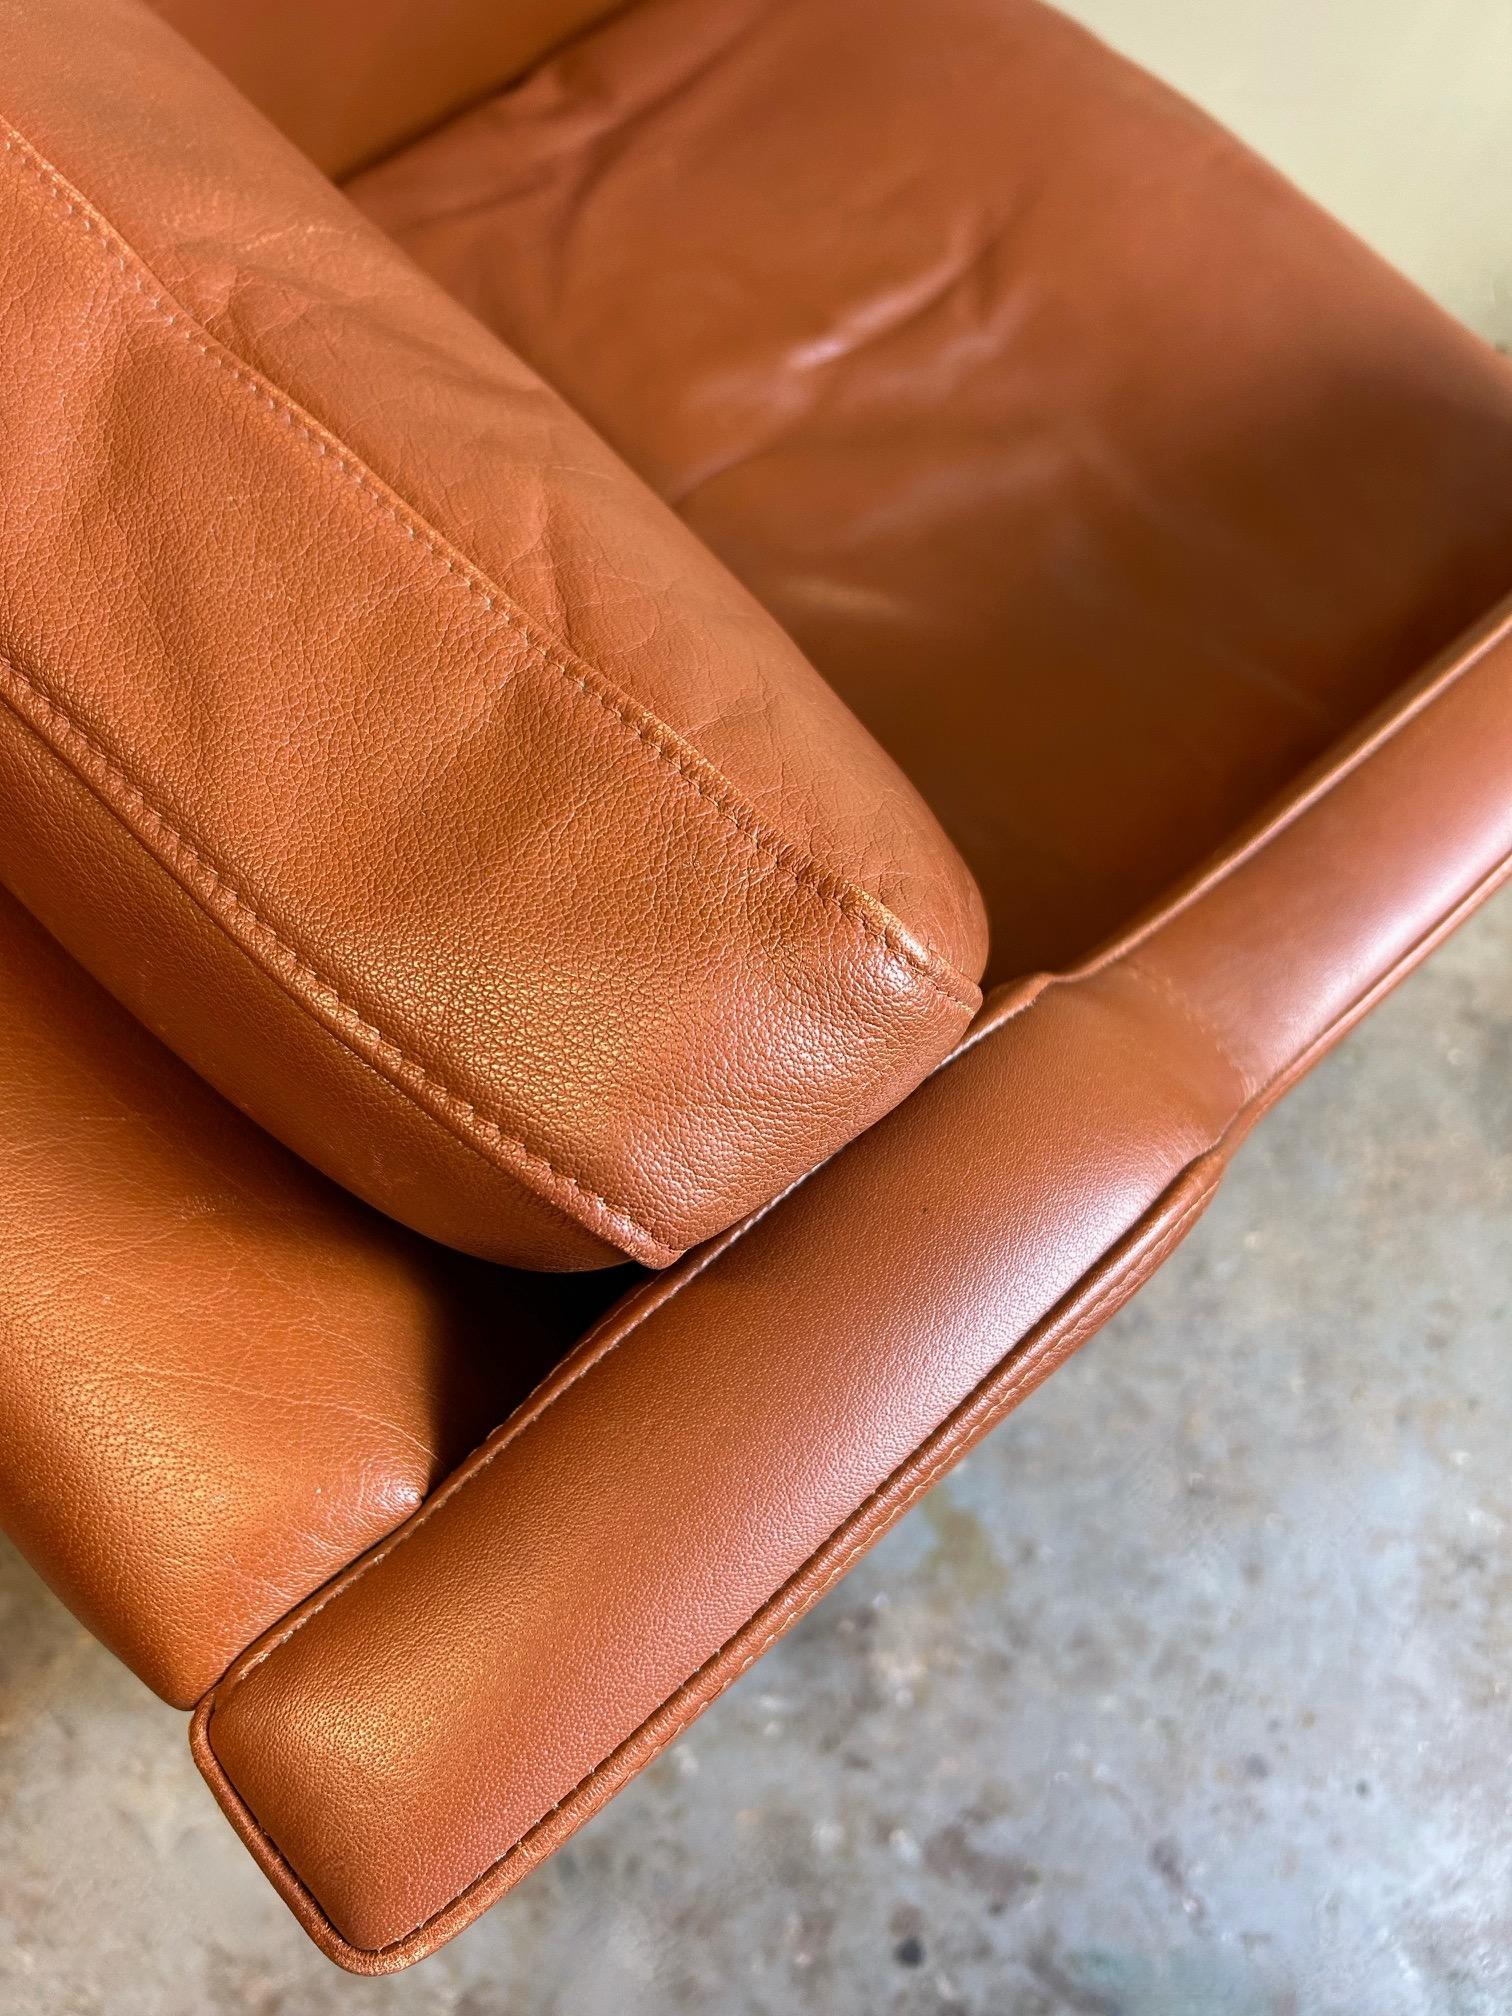 A beautiful Danish tan leather armchair by Stouby, this would make a stylish addition to any living or work area.

The chair has a wide seat and padded backrest for enhanced comfort. A striking piece of classic Scandinavian furniture.

The chair is